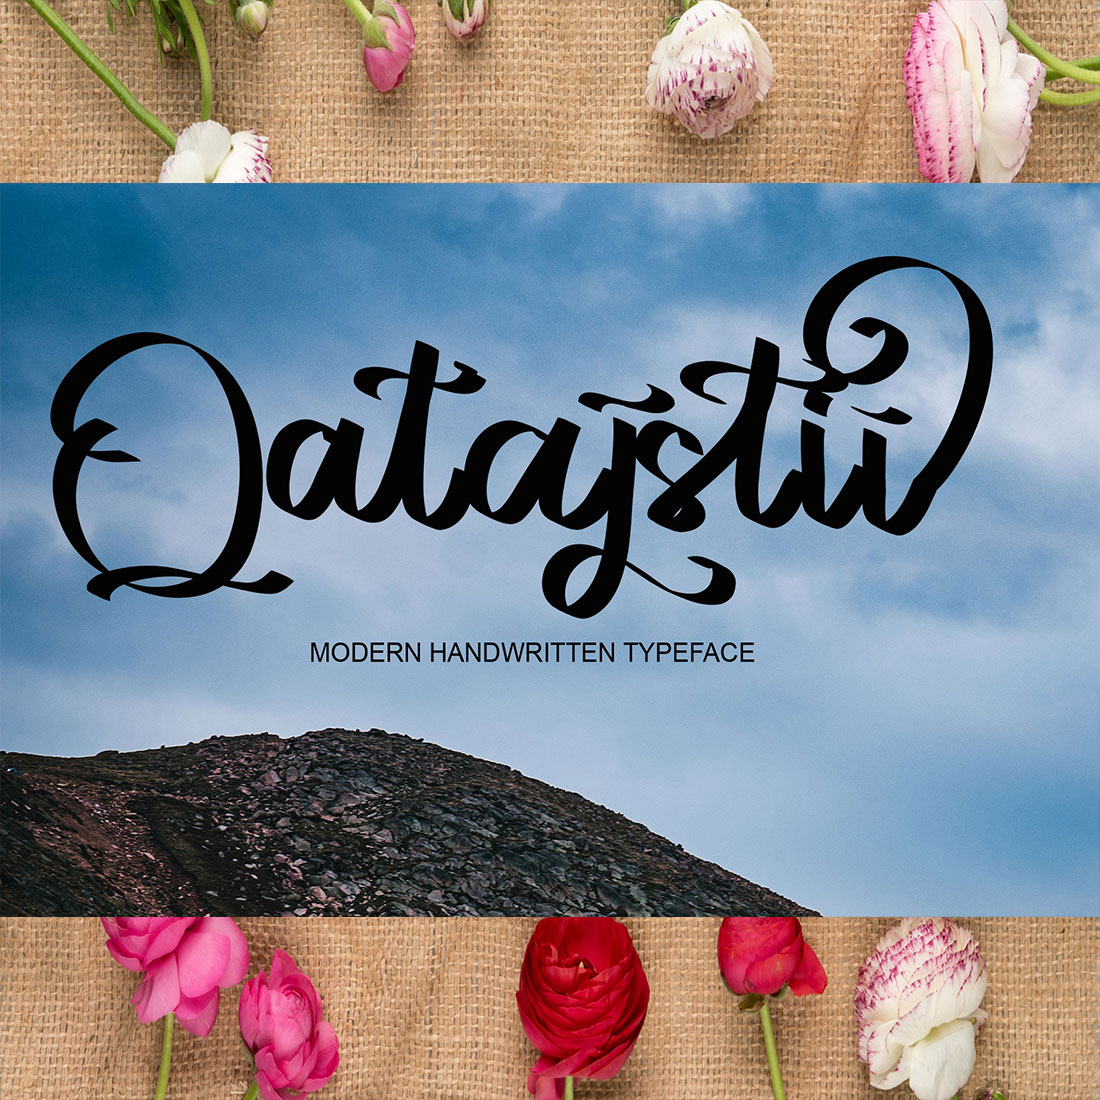 Godstya Signature Font for your designs.